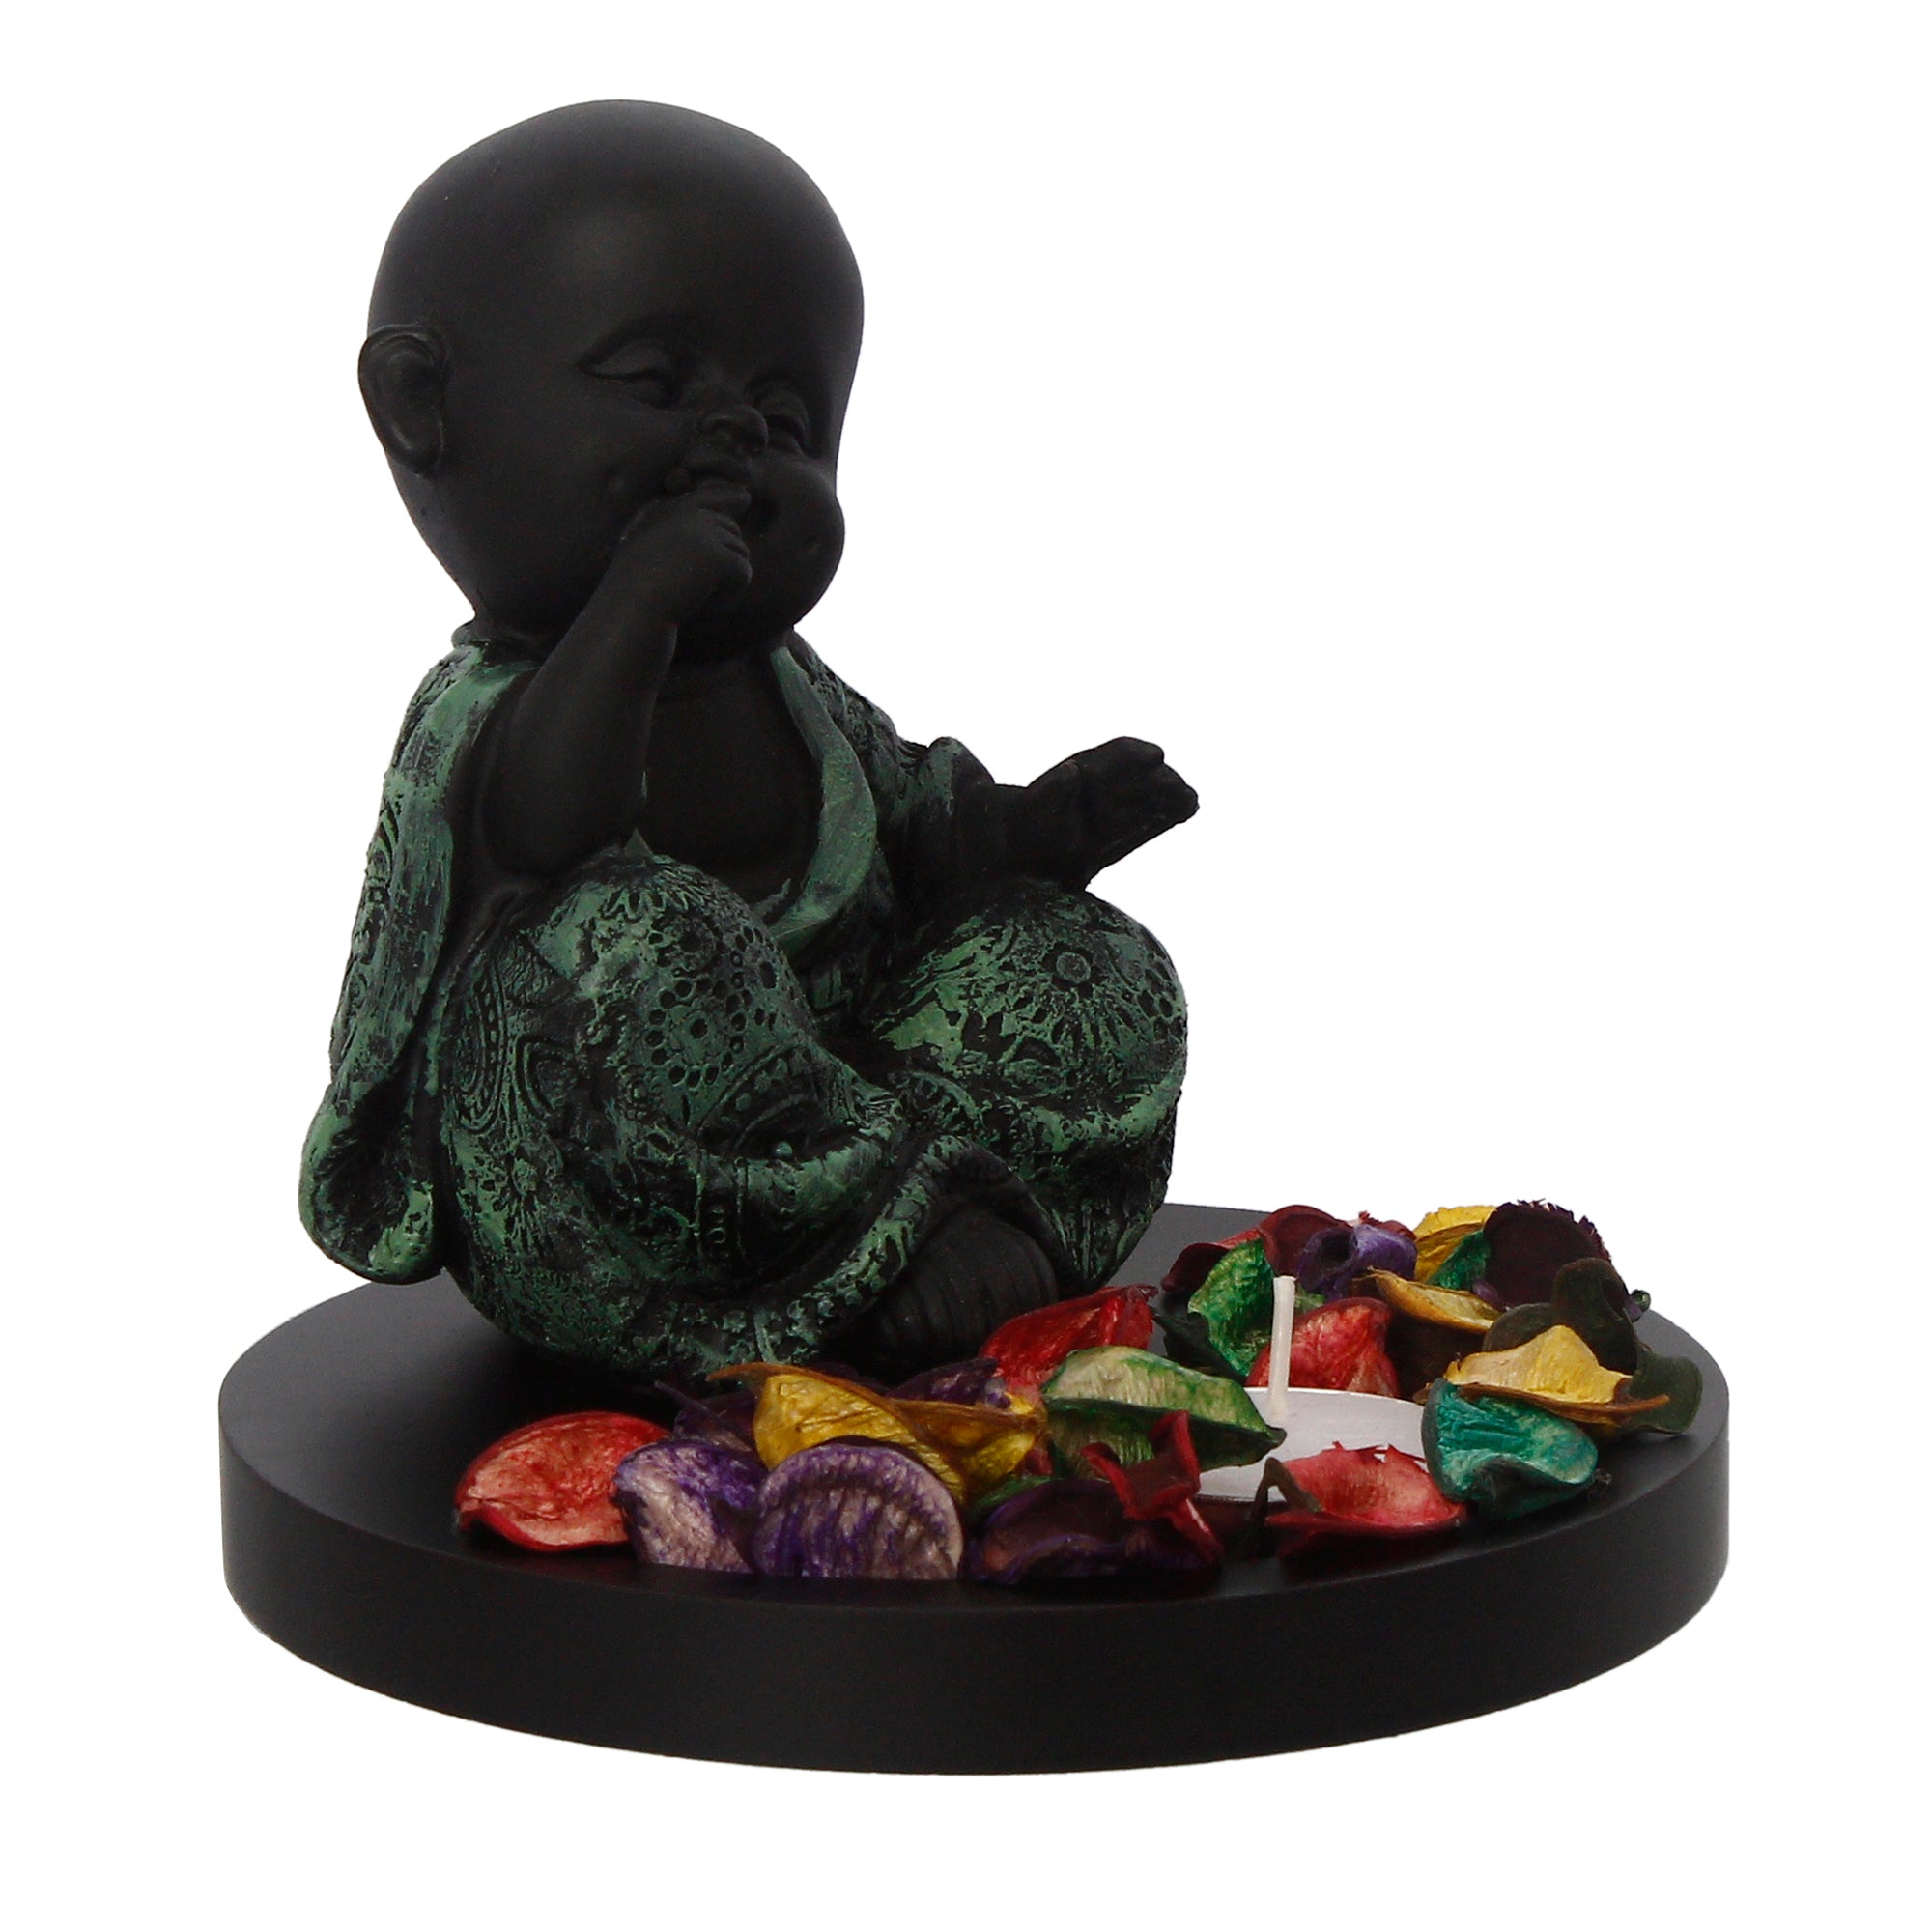 Decorative Smiling Green Monk Buddha with Wooden Base, Fragranced Petals and Tealight 3